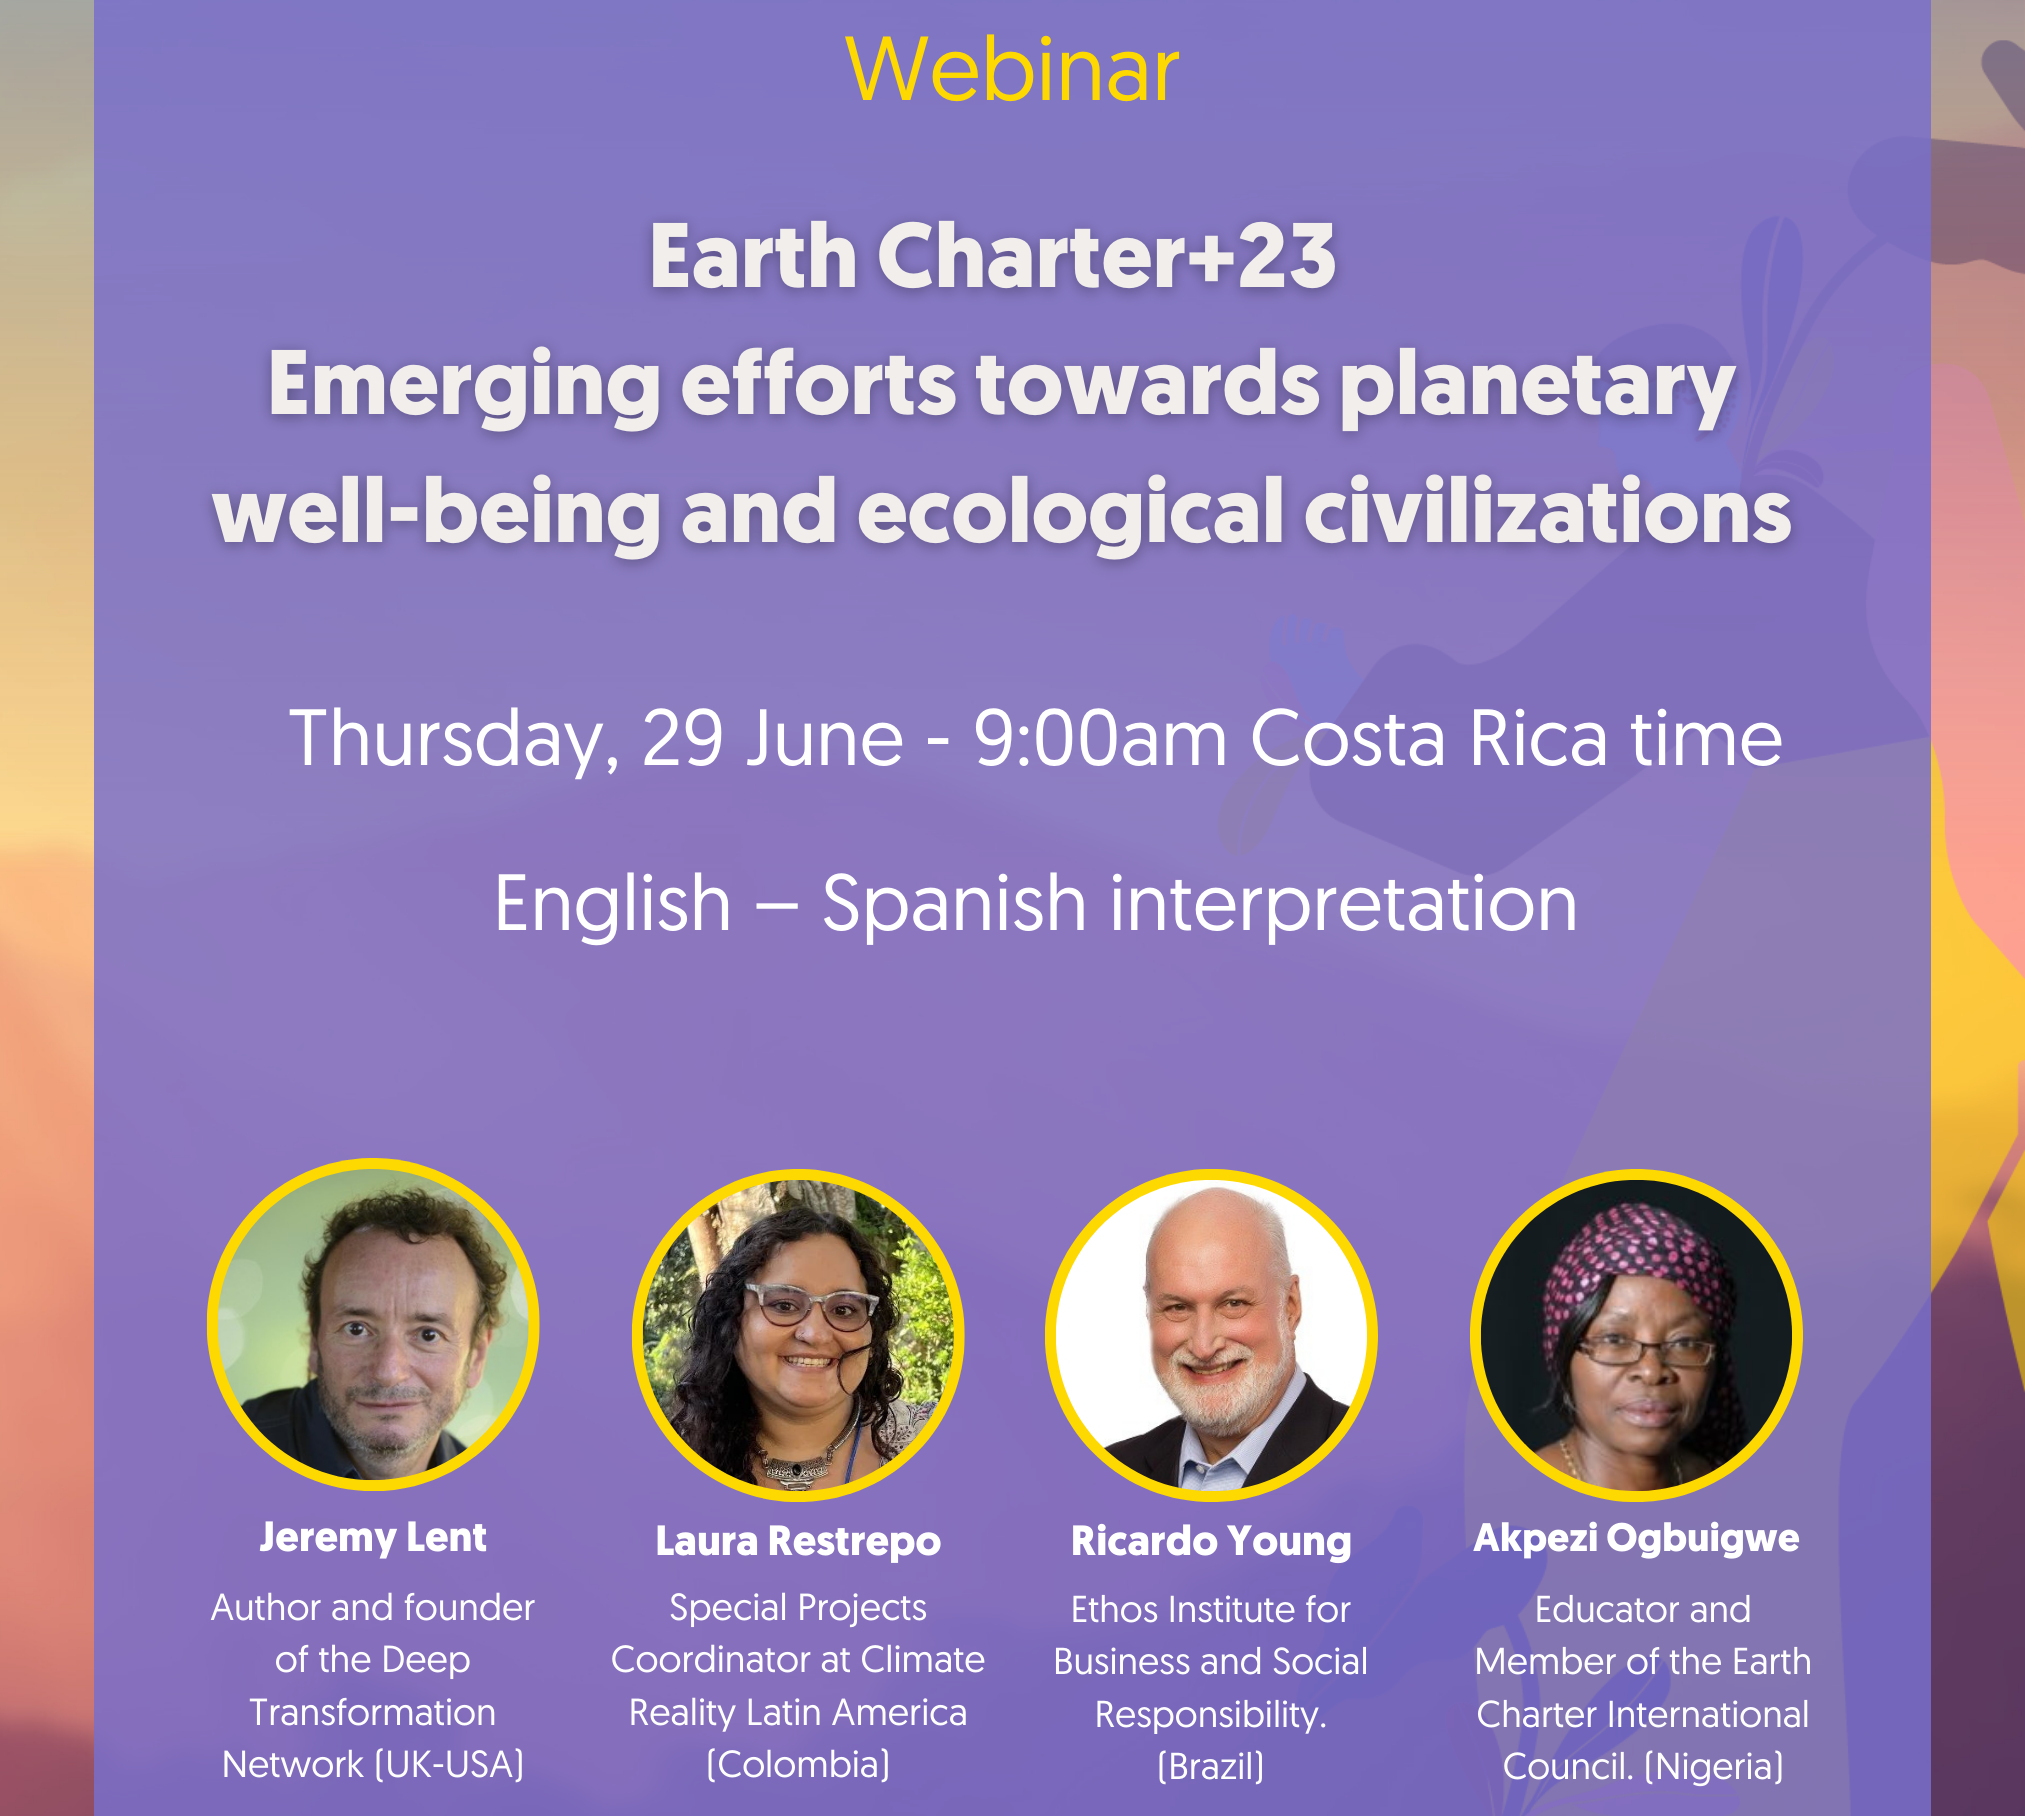 Emerging efforts towards planetary wellbeing and ecological civilizations